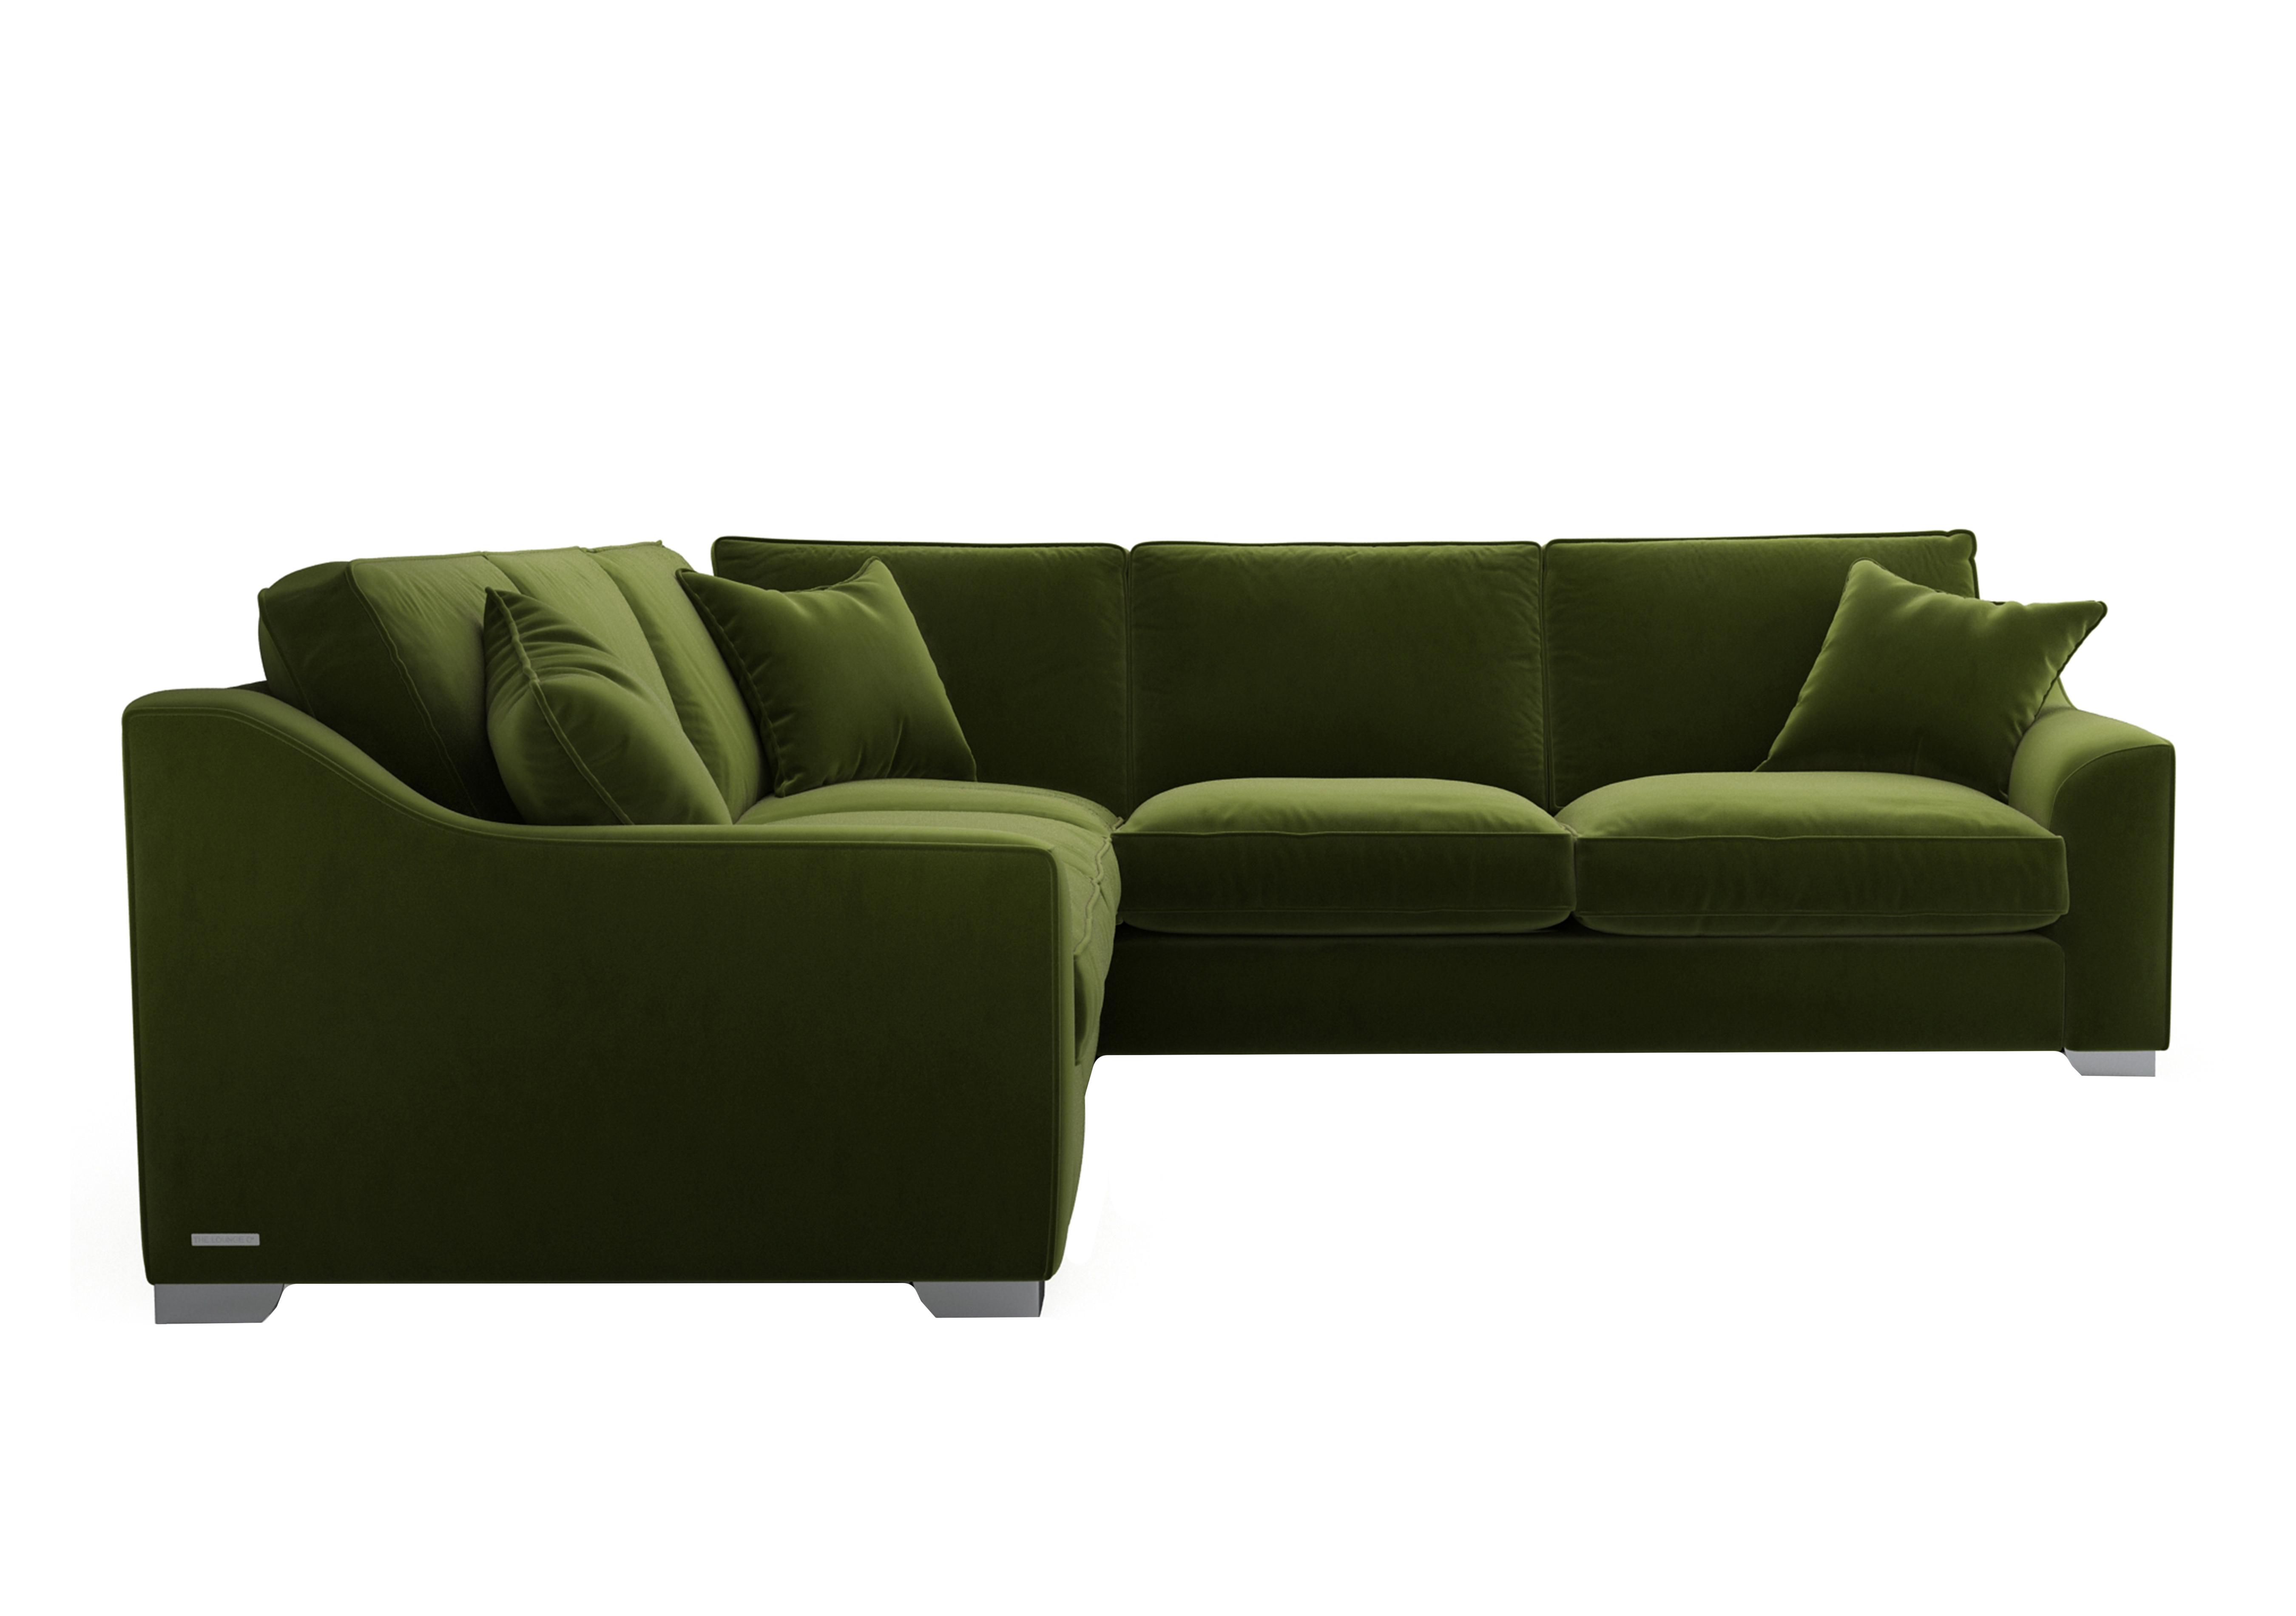 Isobel Large Fabric Corner Sofa in Woo160 Woodland Moss Ch Ft on Furniture Village